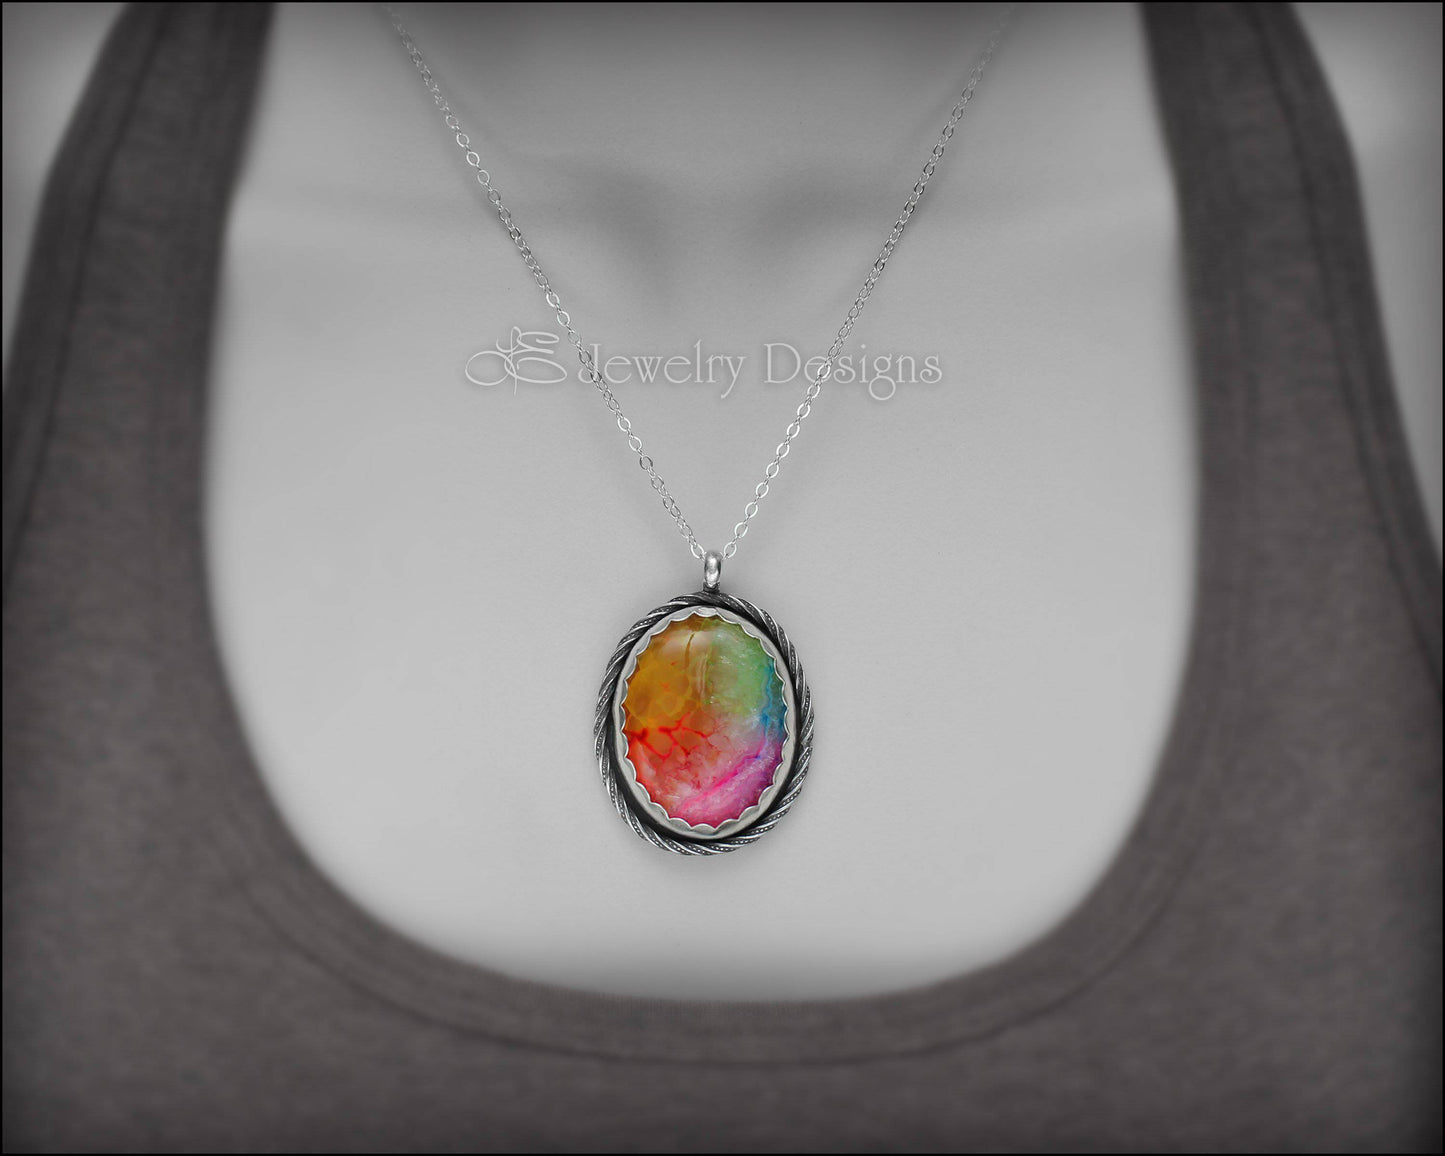 Load image into Gallery viewer, Solar Rainbow Quartz - Necklace #3 - LE Jewelry Designs
